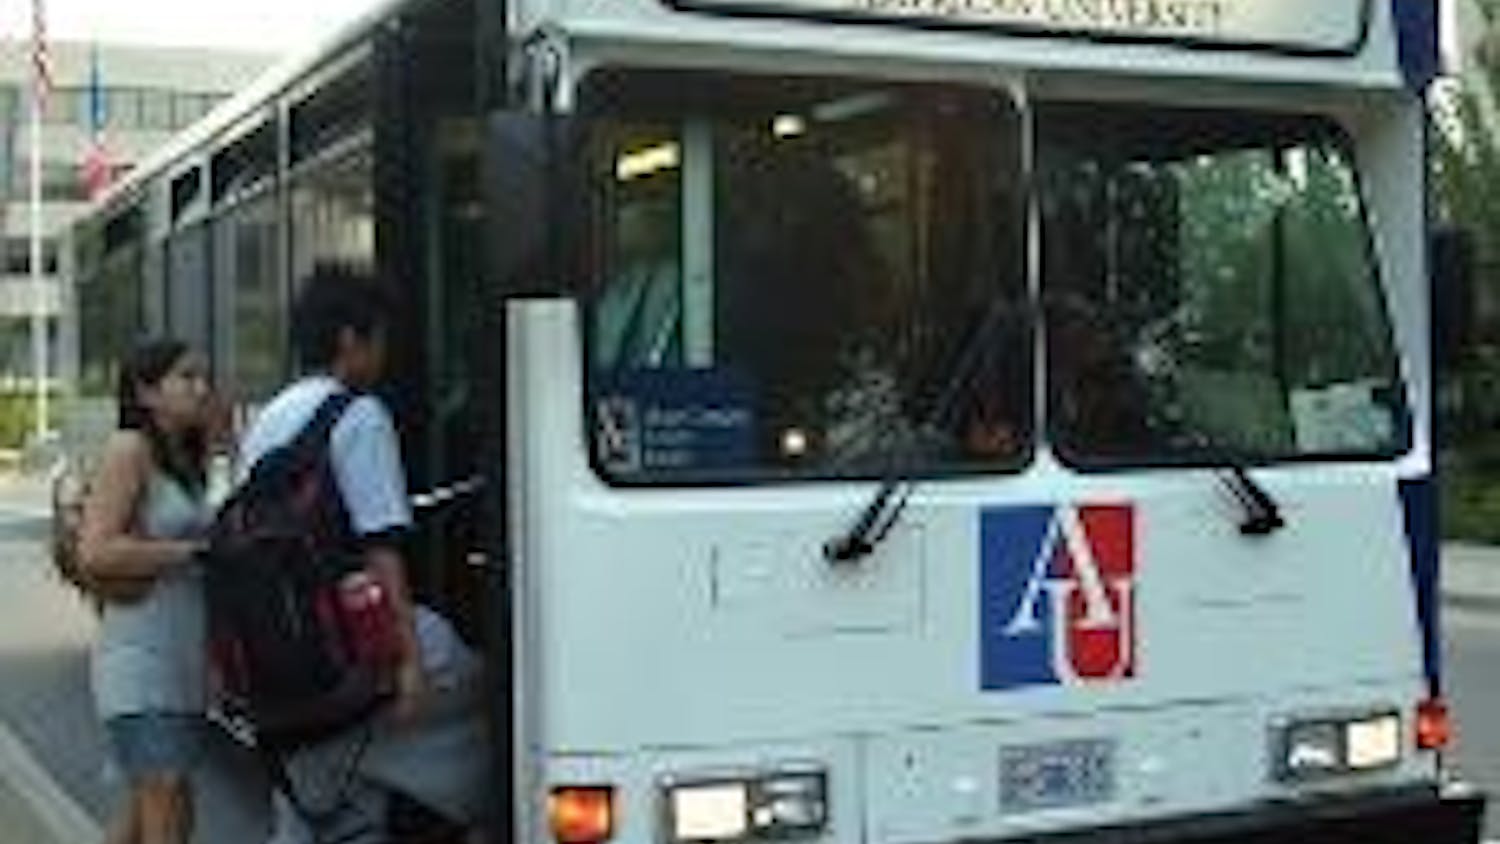 TO TENLEY - Students board the AU shuttle at the North side stop to Tenleytown. The shuttle drivers are currently attempting to unionize.